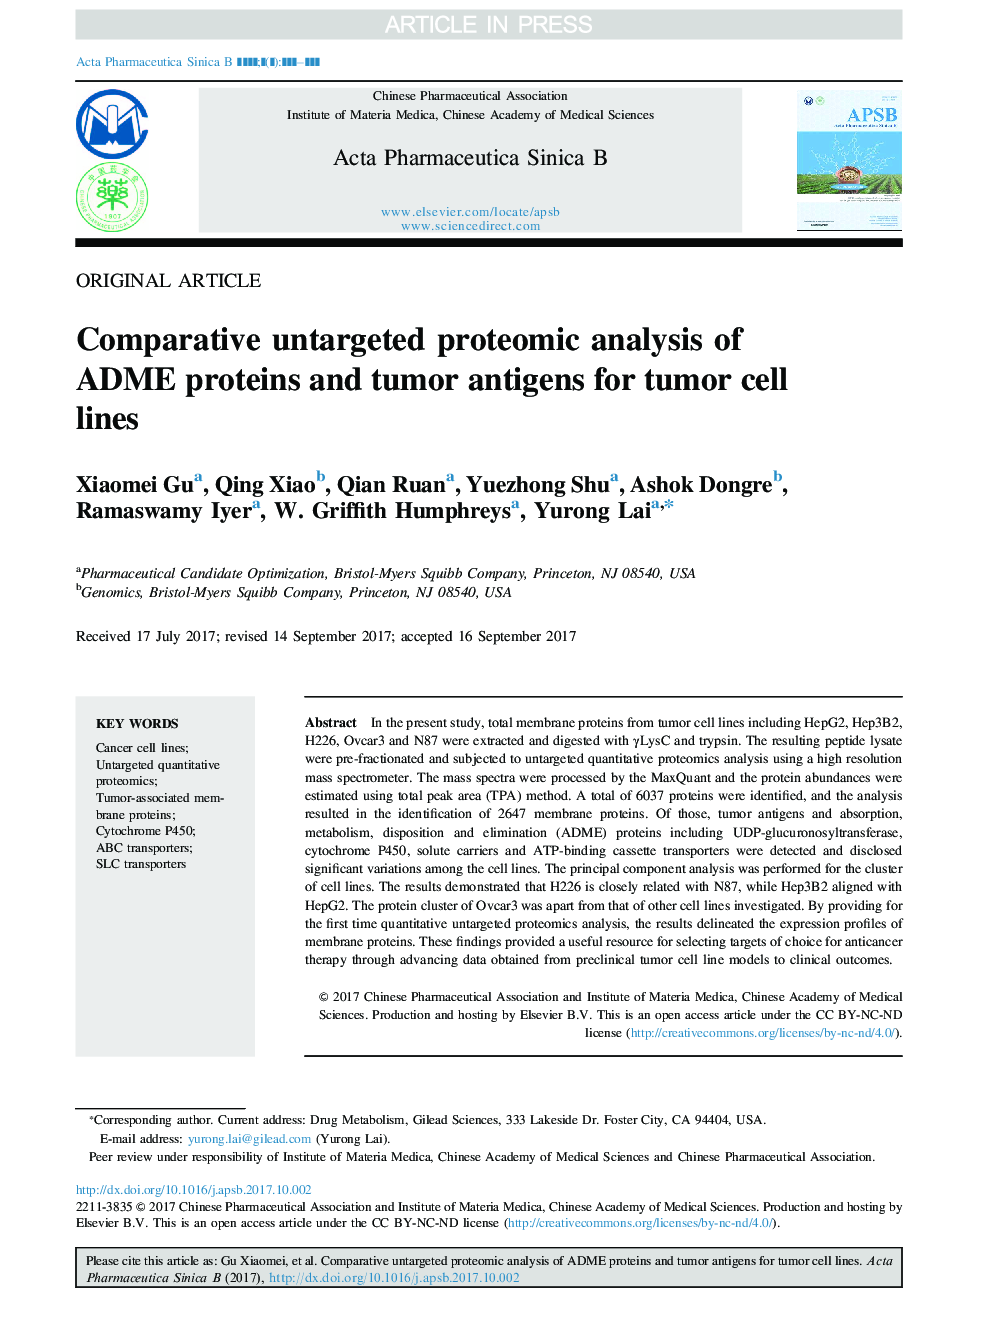 Comparative untargeted proteomic analysis of ADME proteins and tumor antigens for tumor cell lines